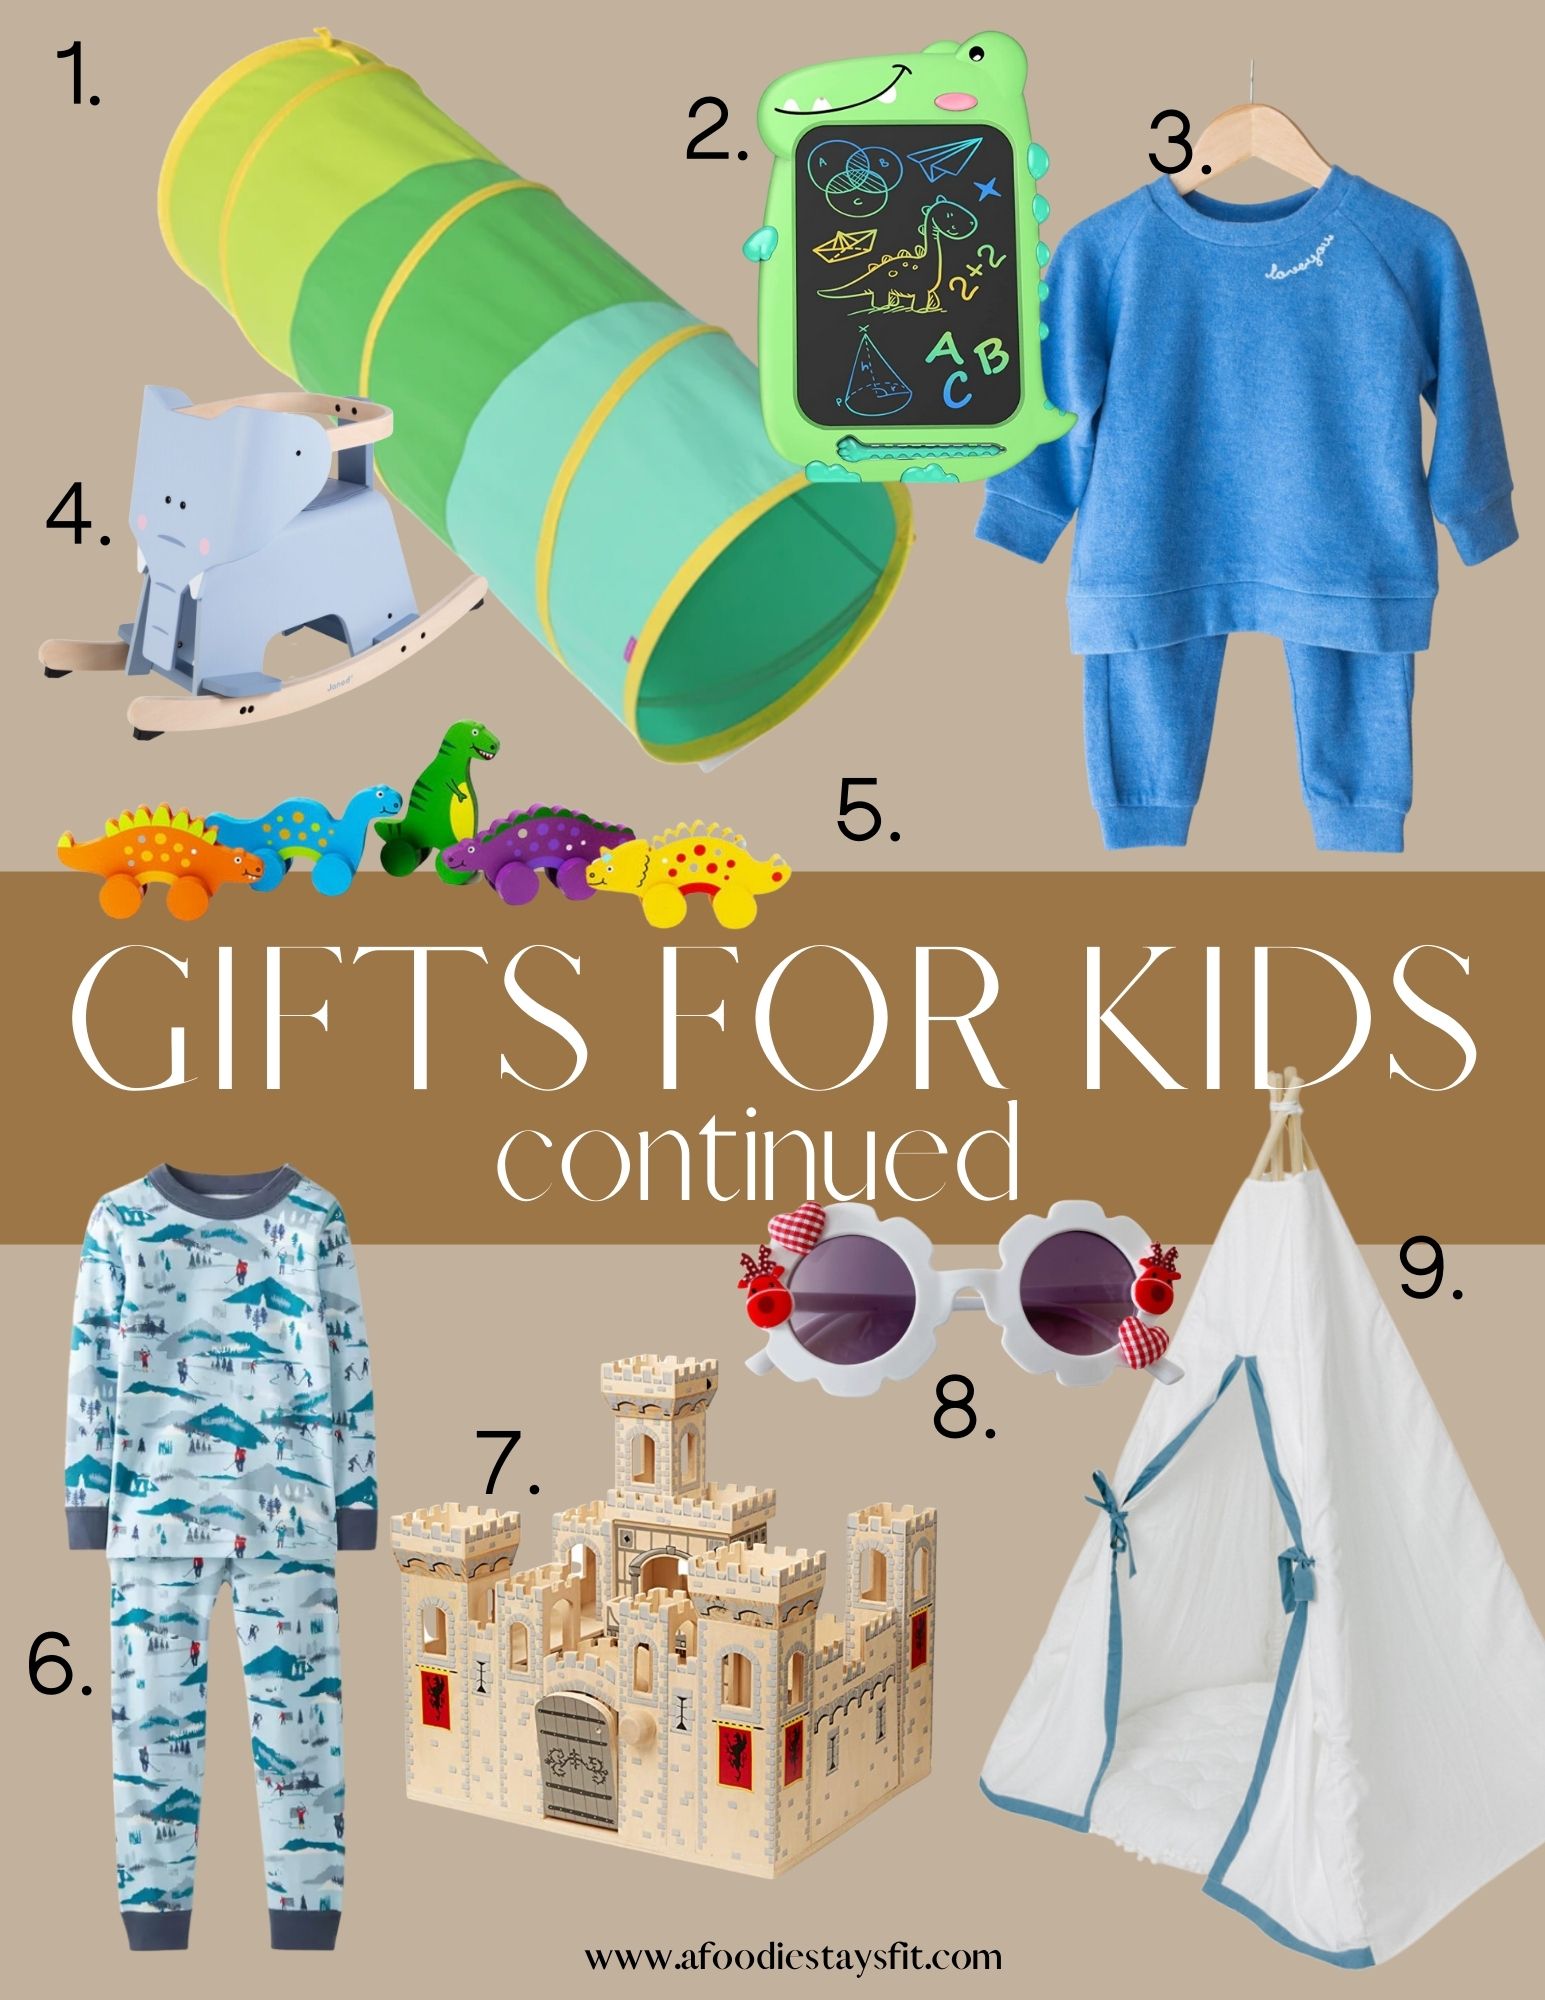 Kids gift ideas - 2021 Gift Guides